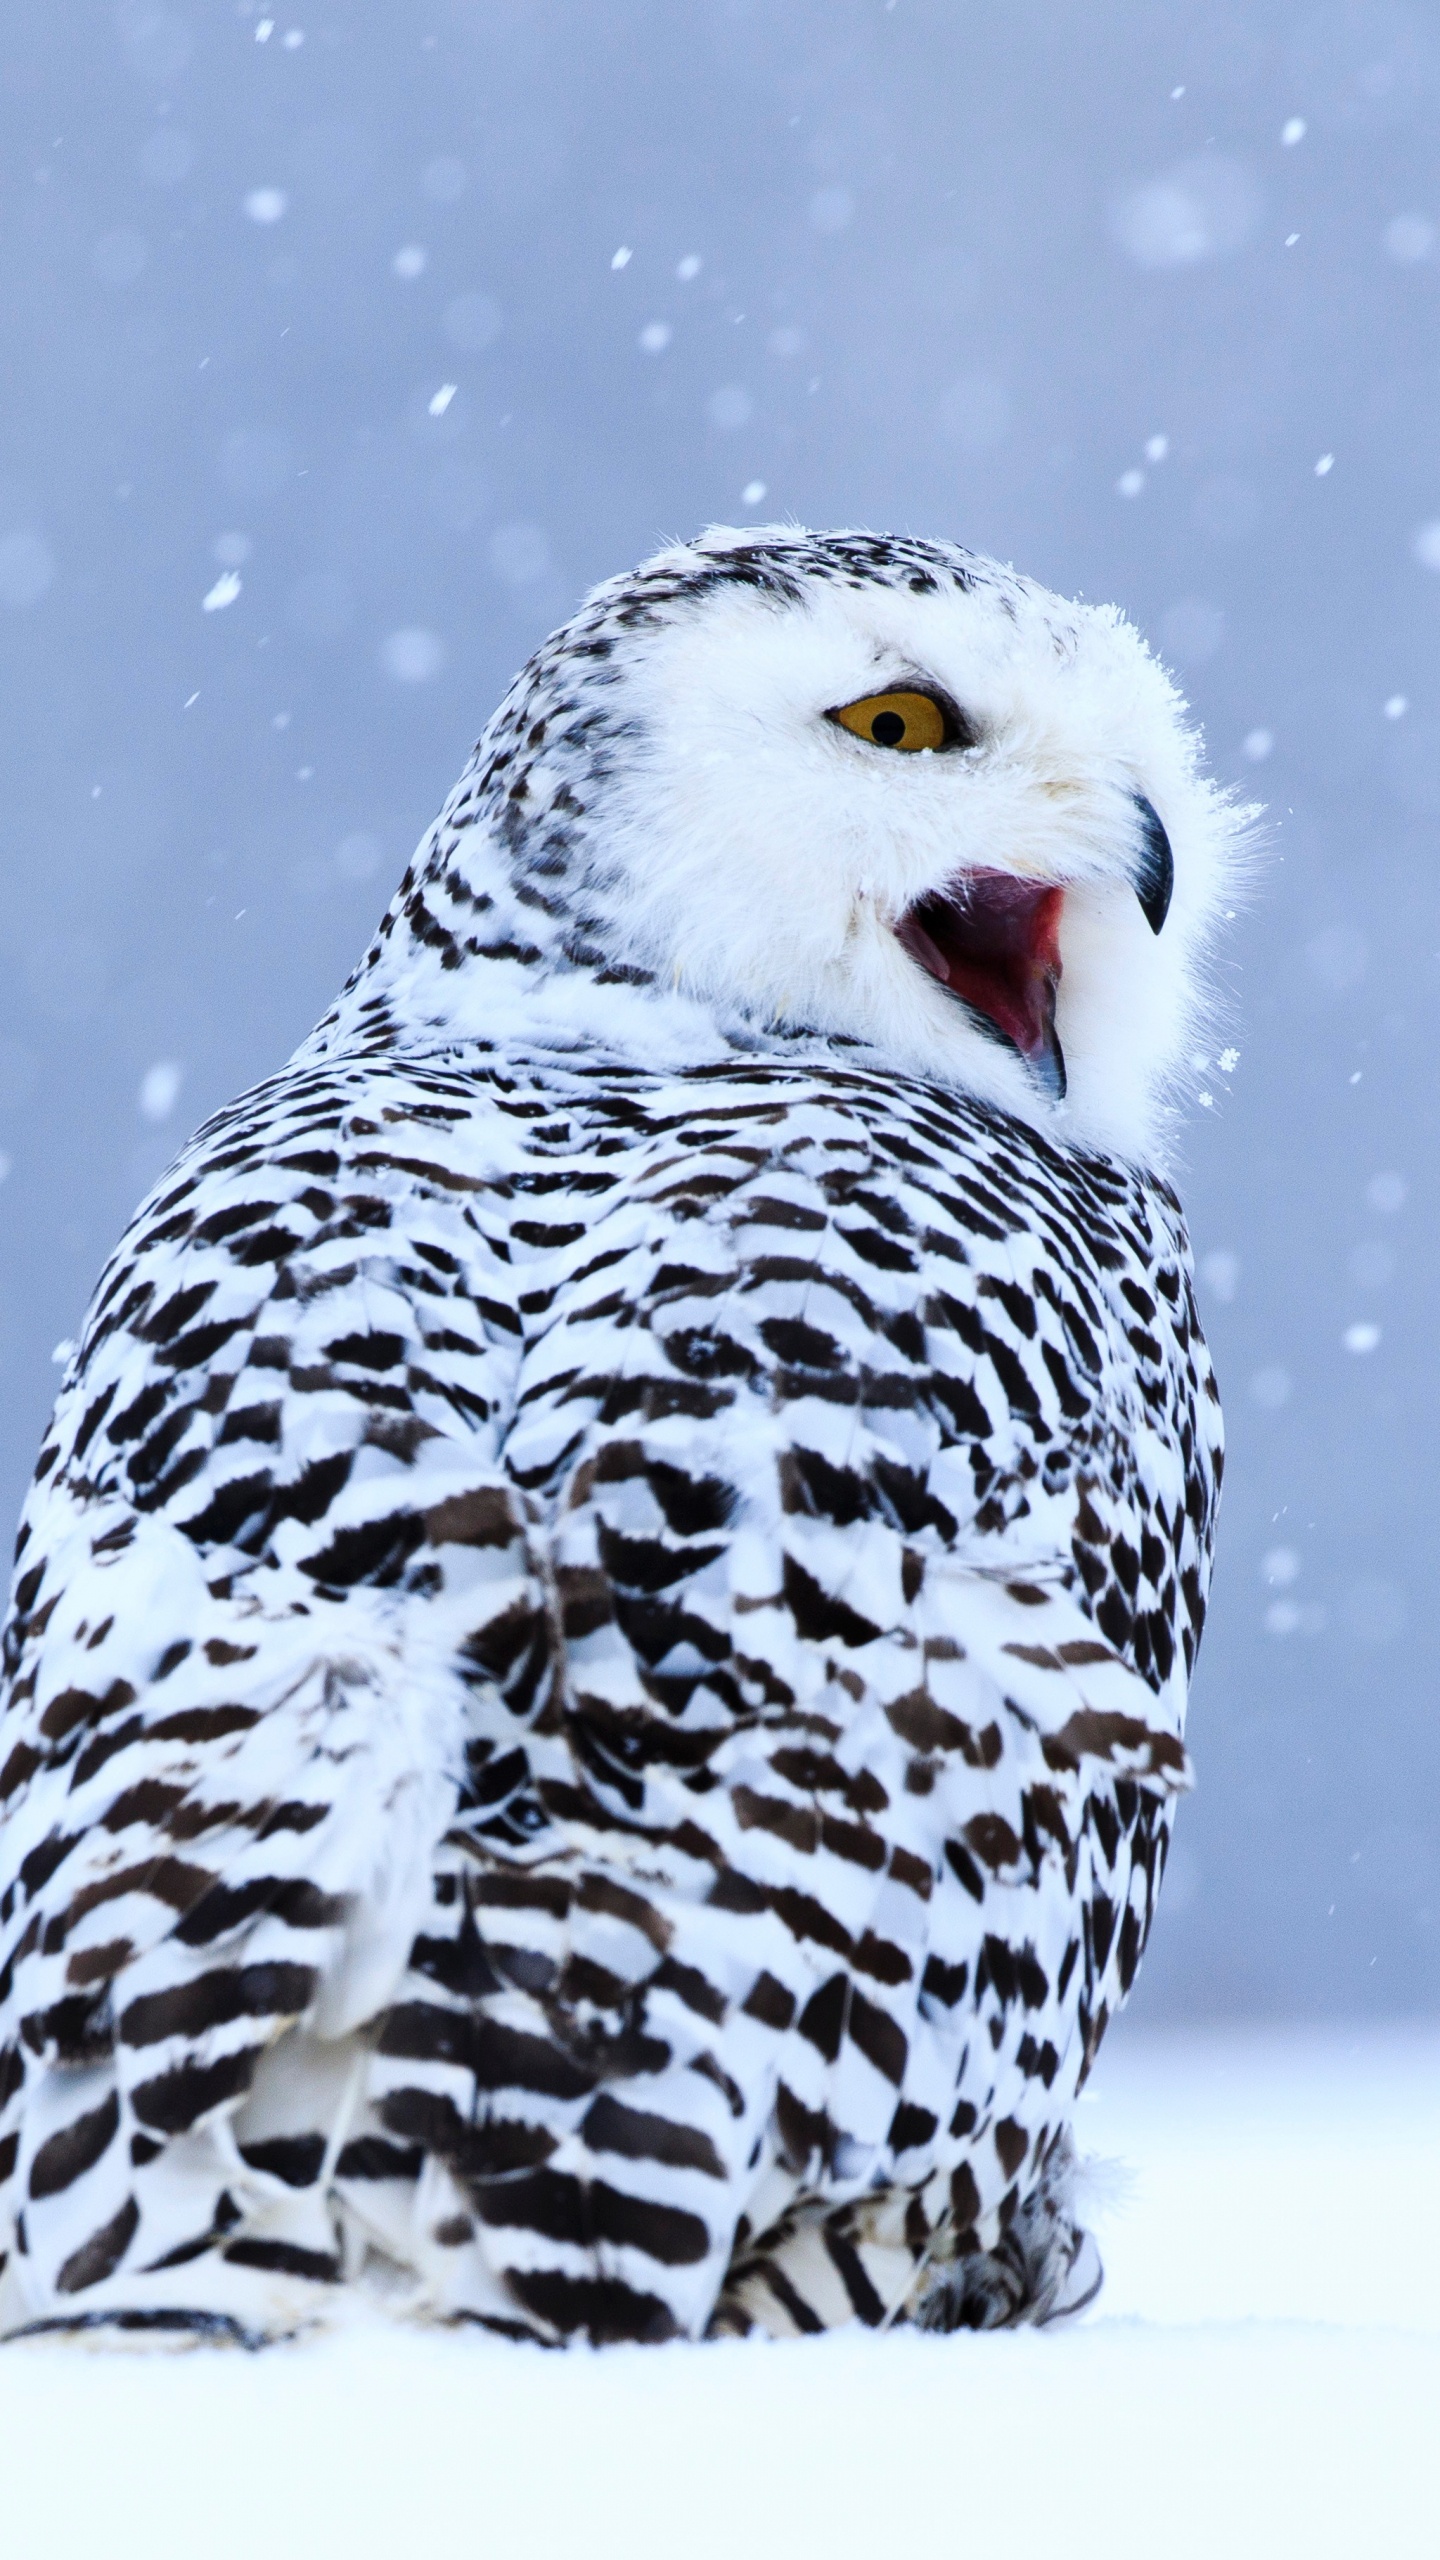 White and Black Owl on Snow Covered Ground During Daytime. Wallpaper in 1440x2560 Resolution